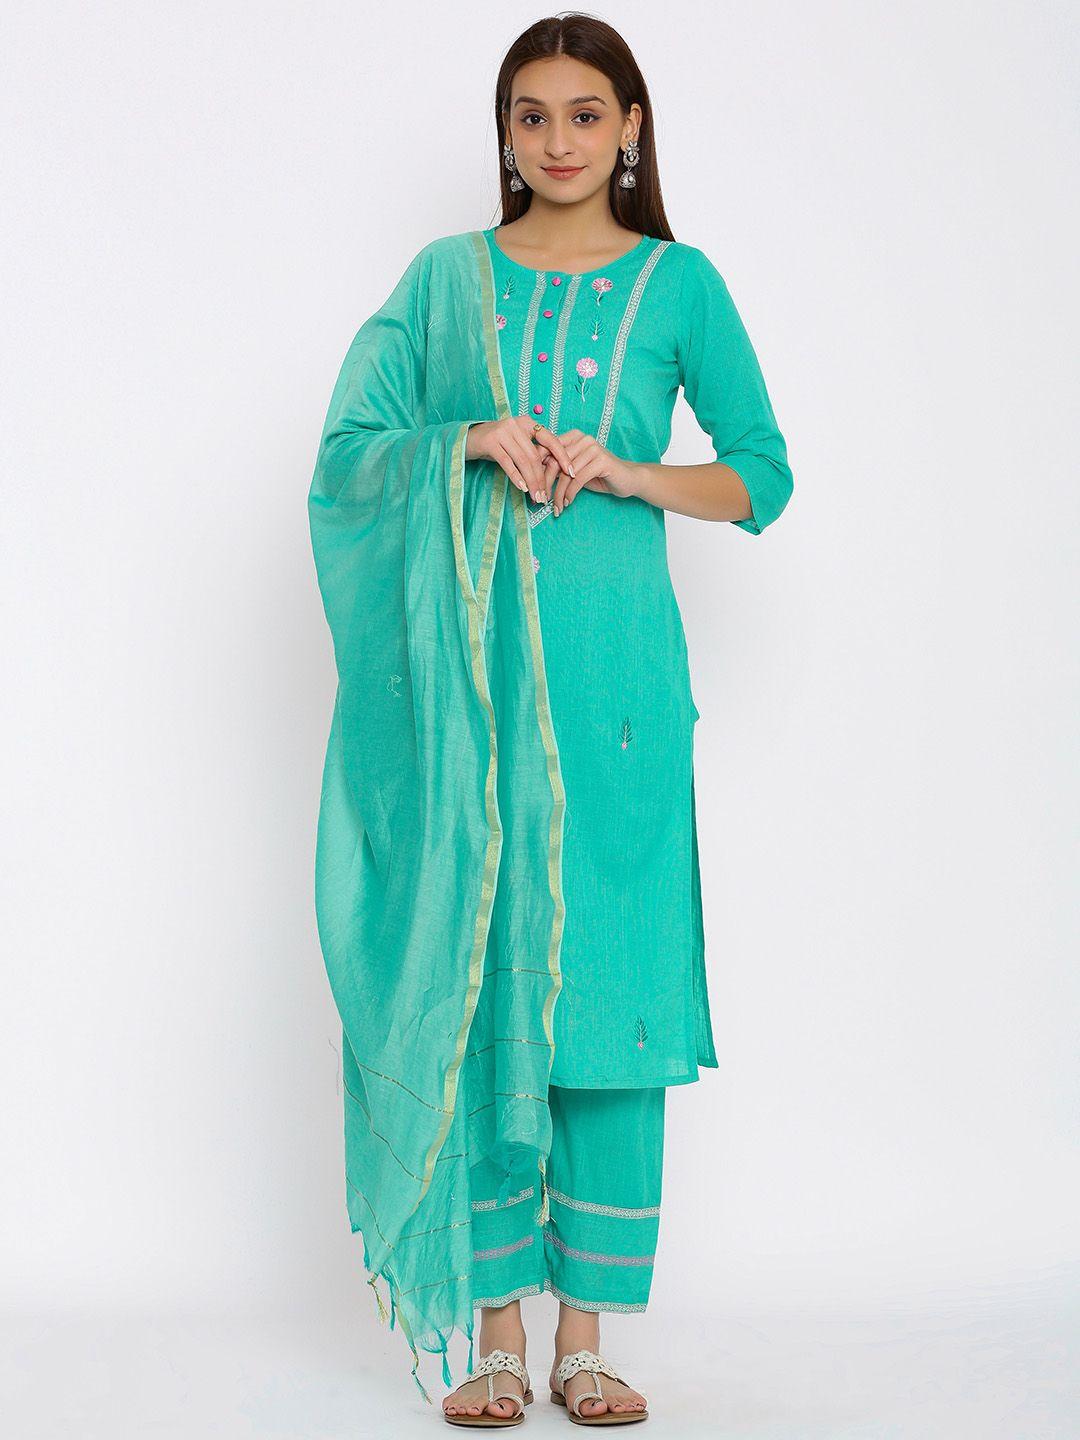 here&now turquoise blue floral embroidered regular kurta with palazzos & with dupatta